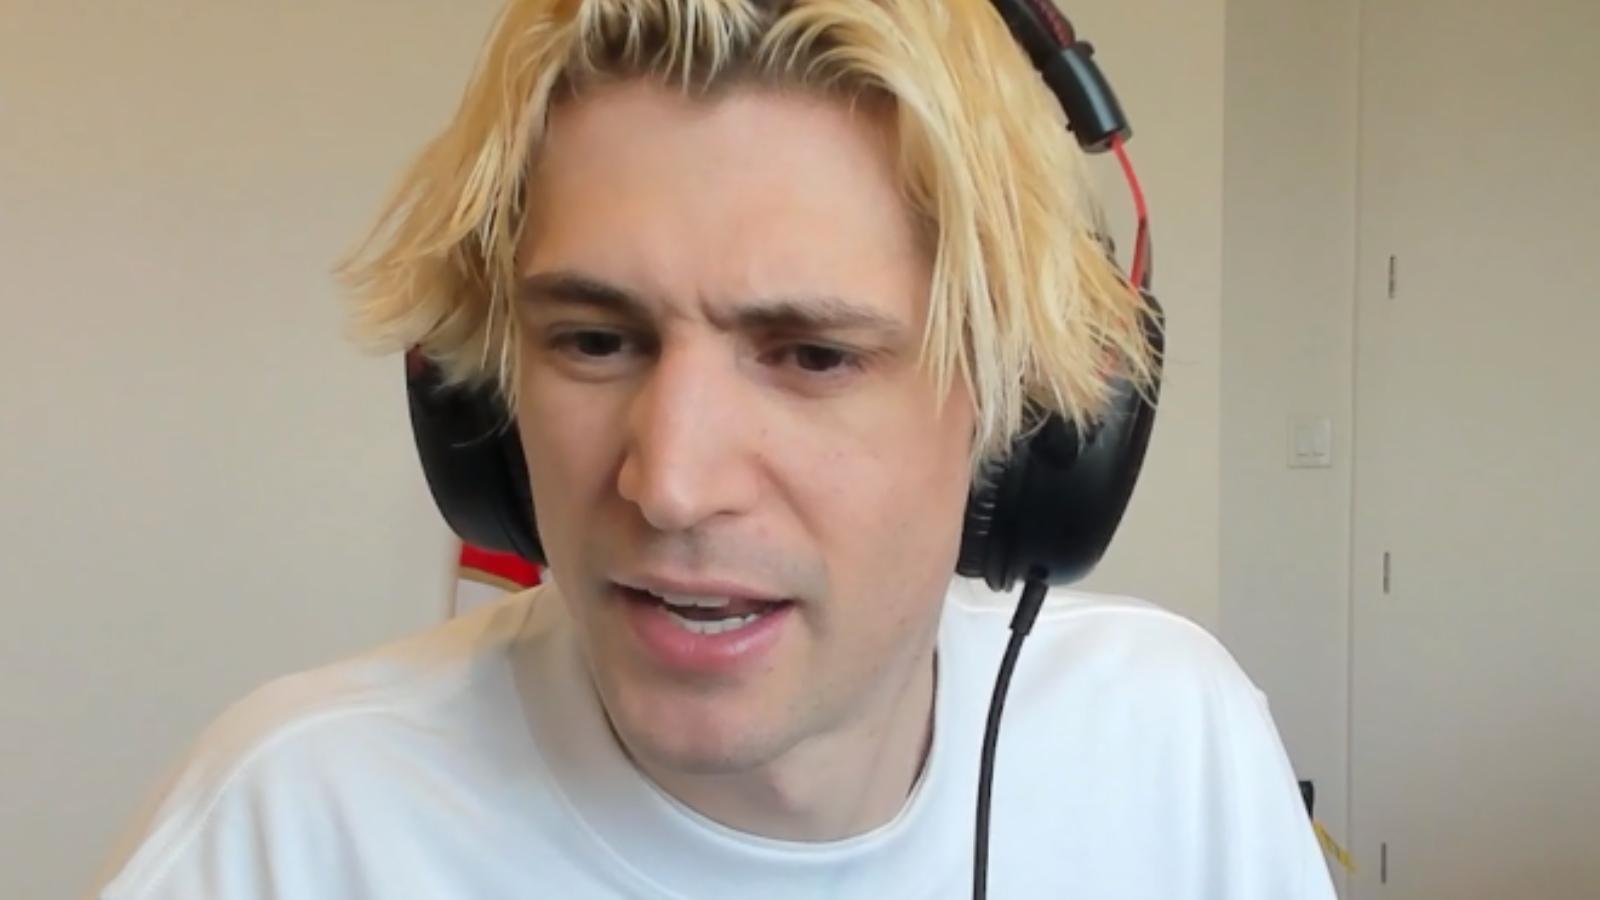 xqc streaming on twitch